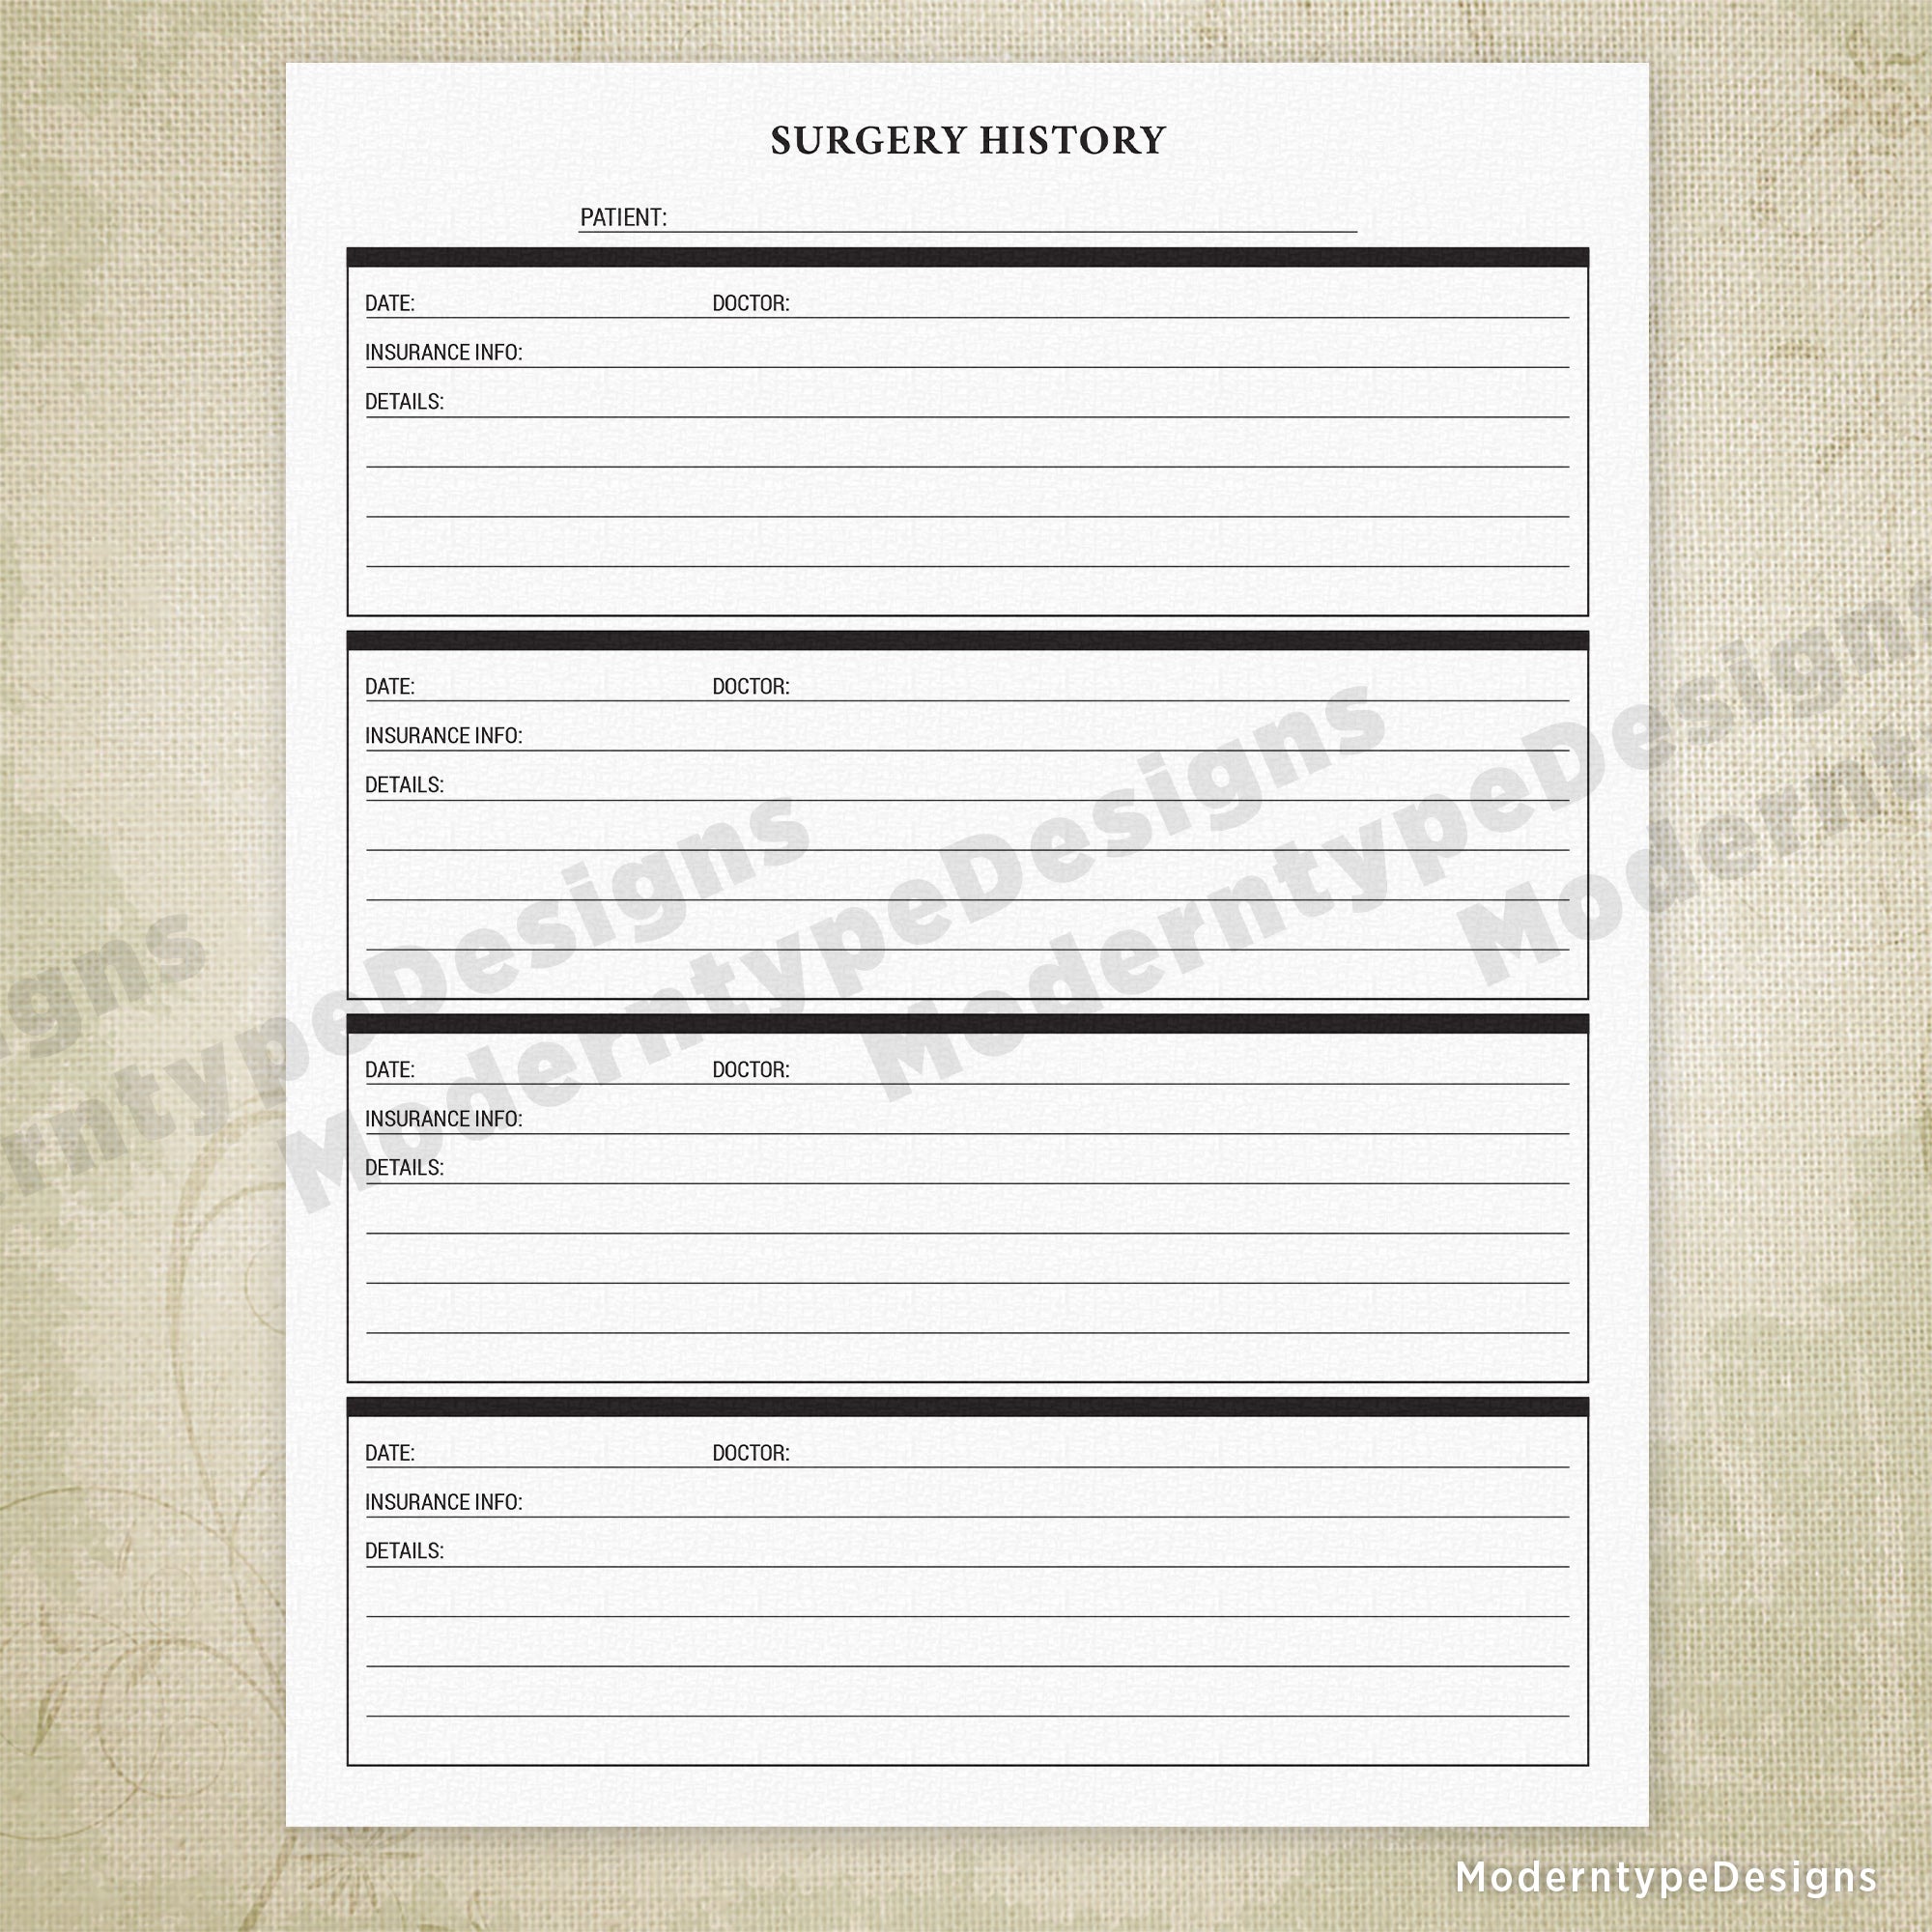 Surgery History Printable Form for Patients